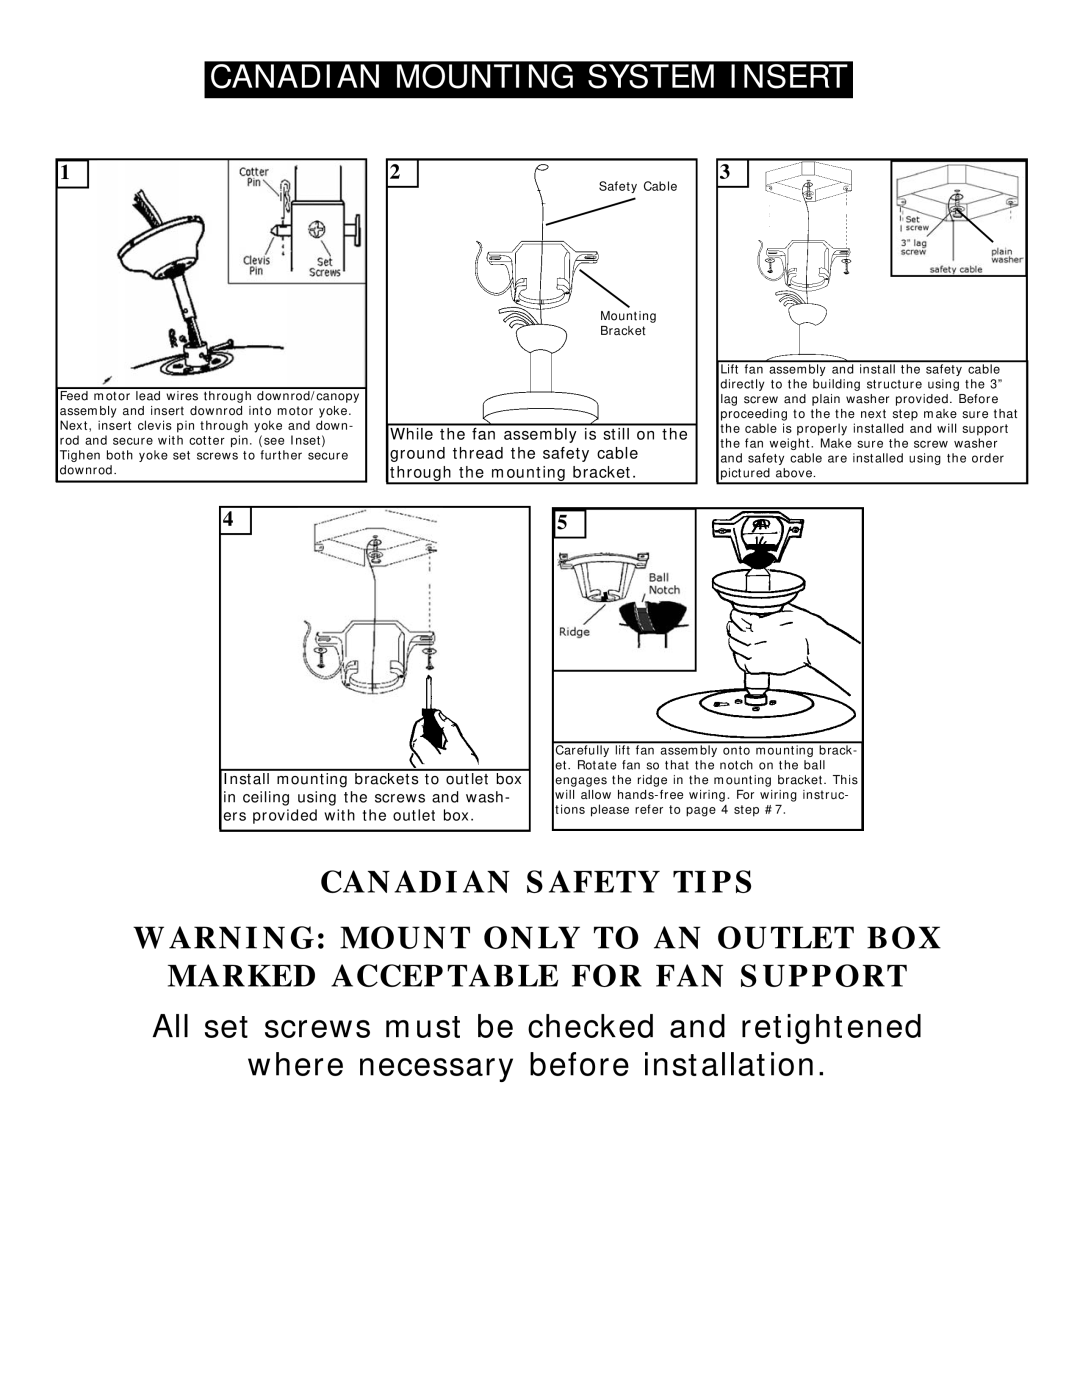 Monte Carlo Fan Company 5VL52 Canadian Safety Tips, While the fan assembly is still on the, ground thread the safety cable 